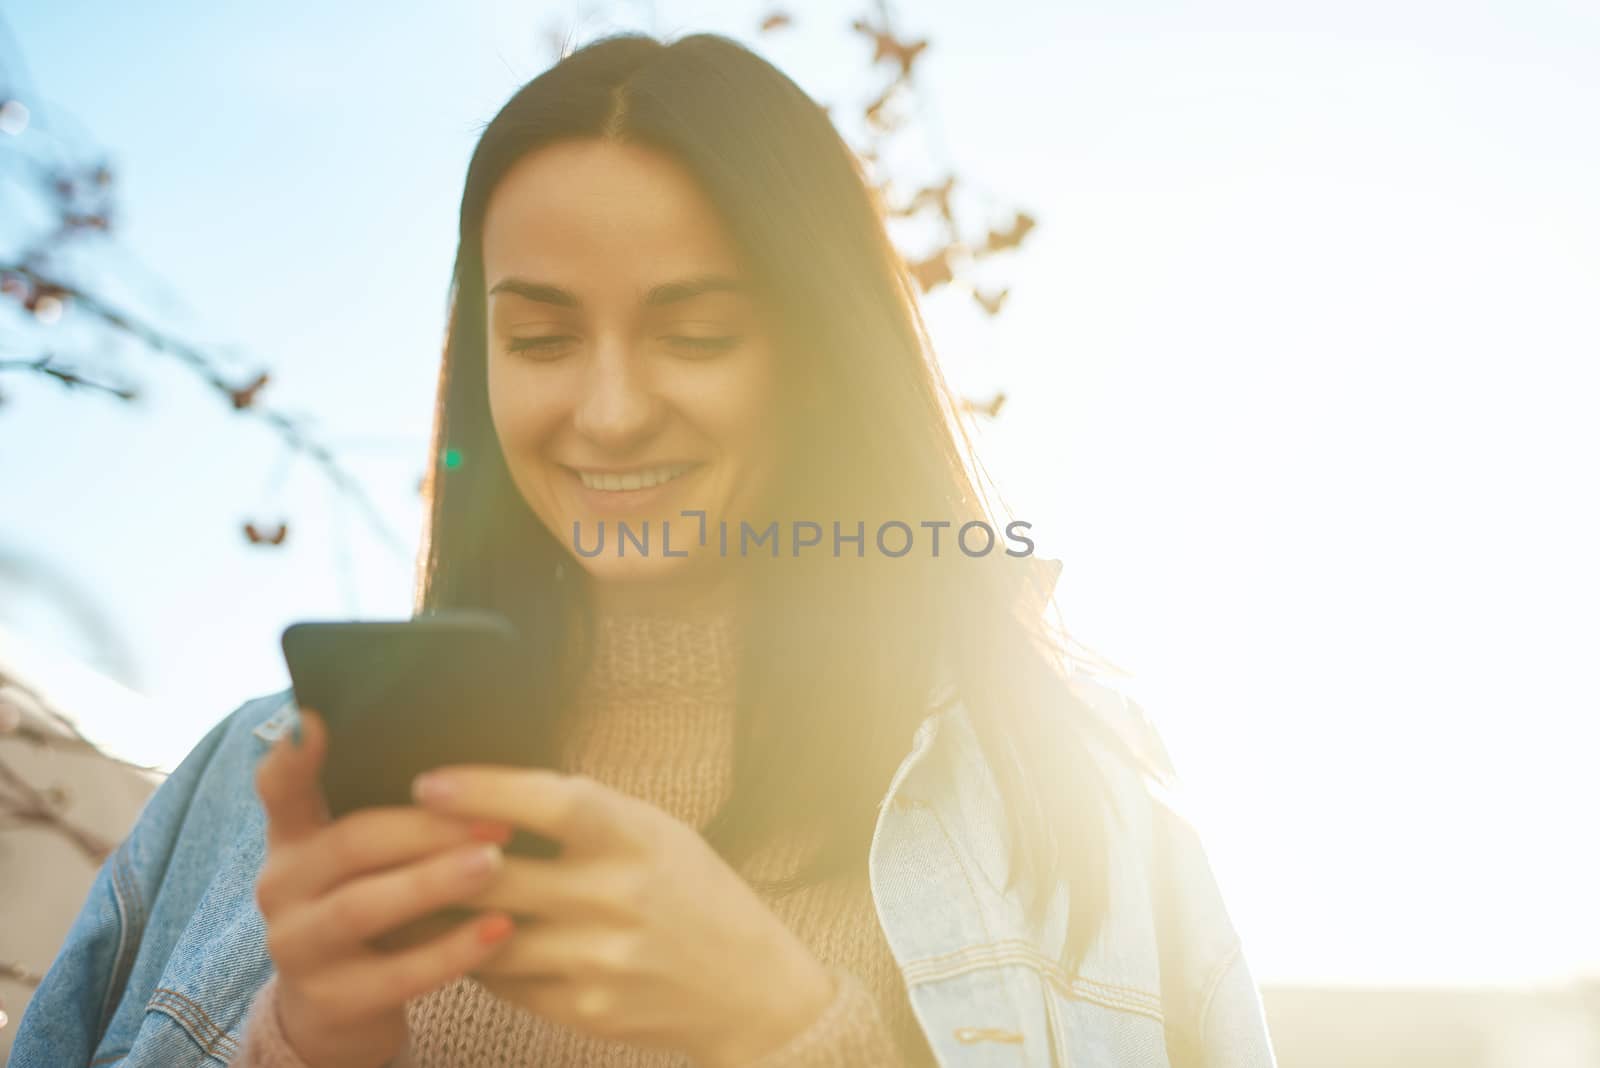 Cheerful smiling young female communicating by internet using a cellphone outdoors in a nice sunny autumn day